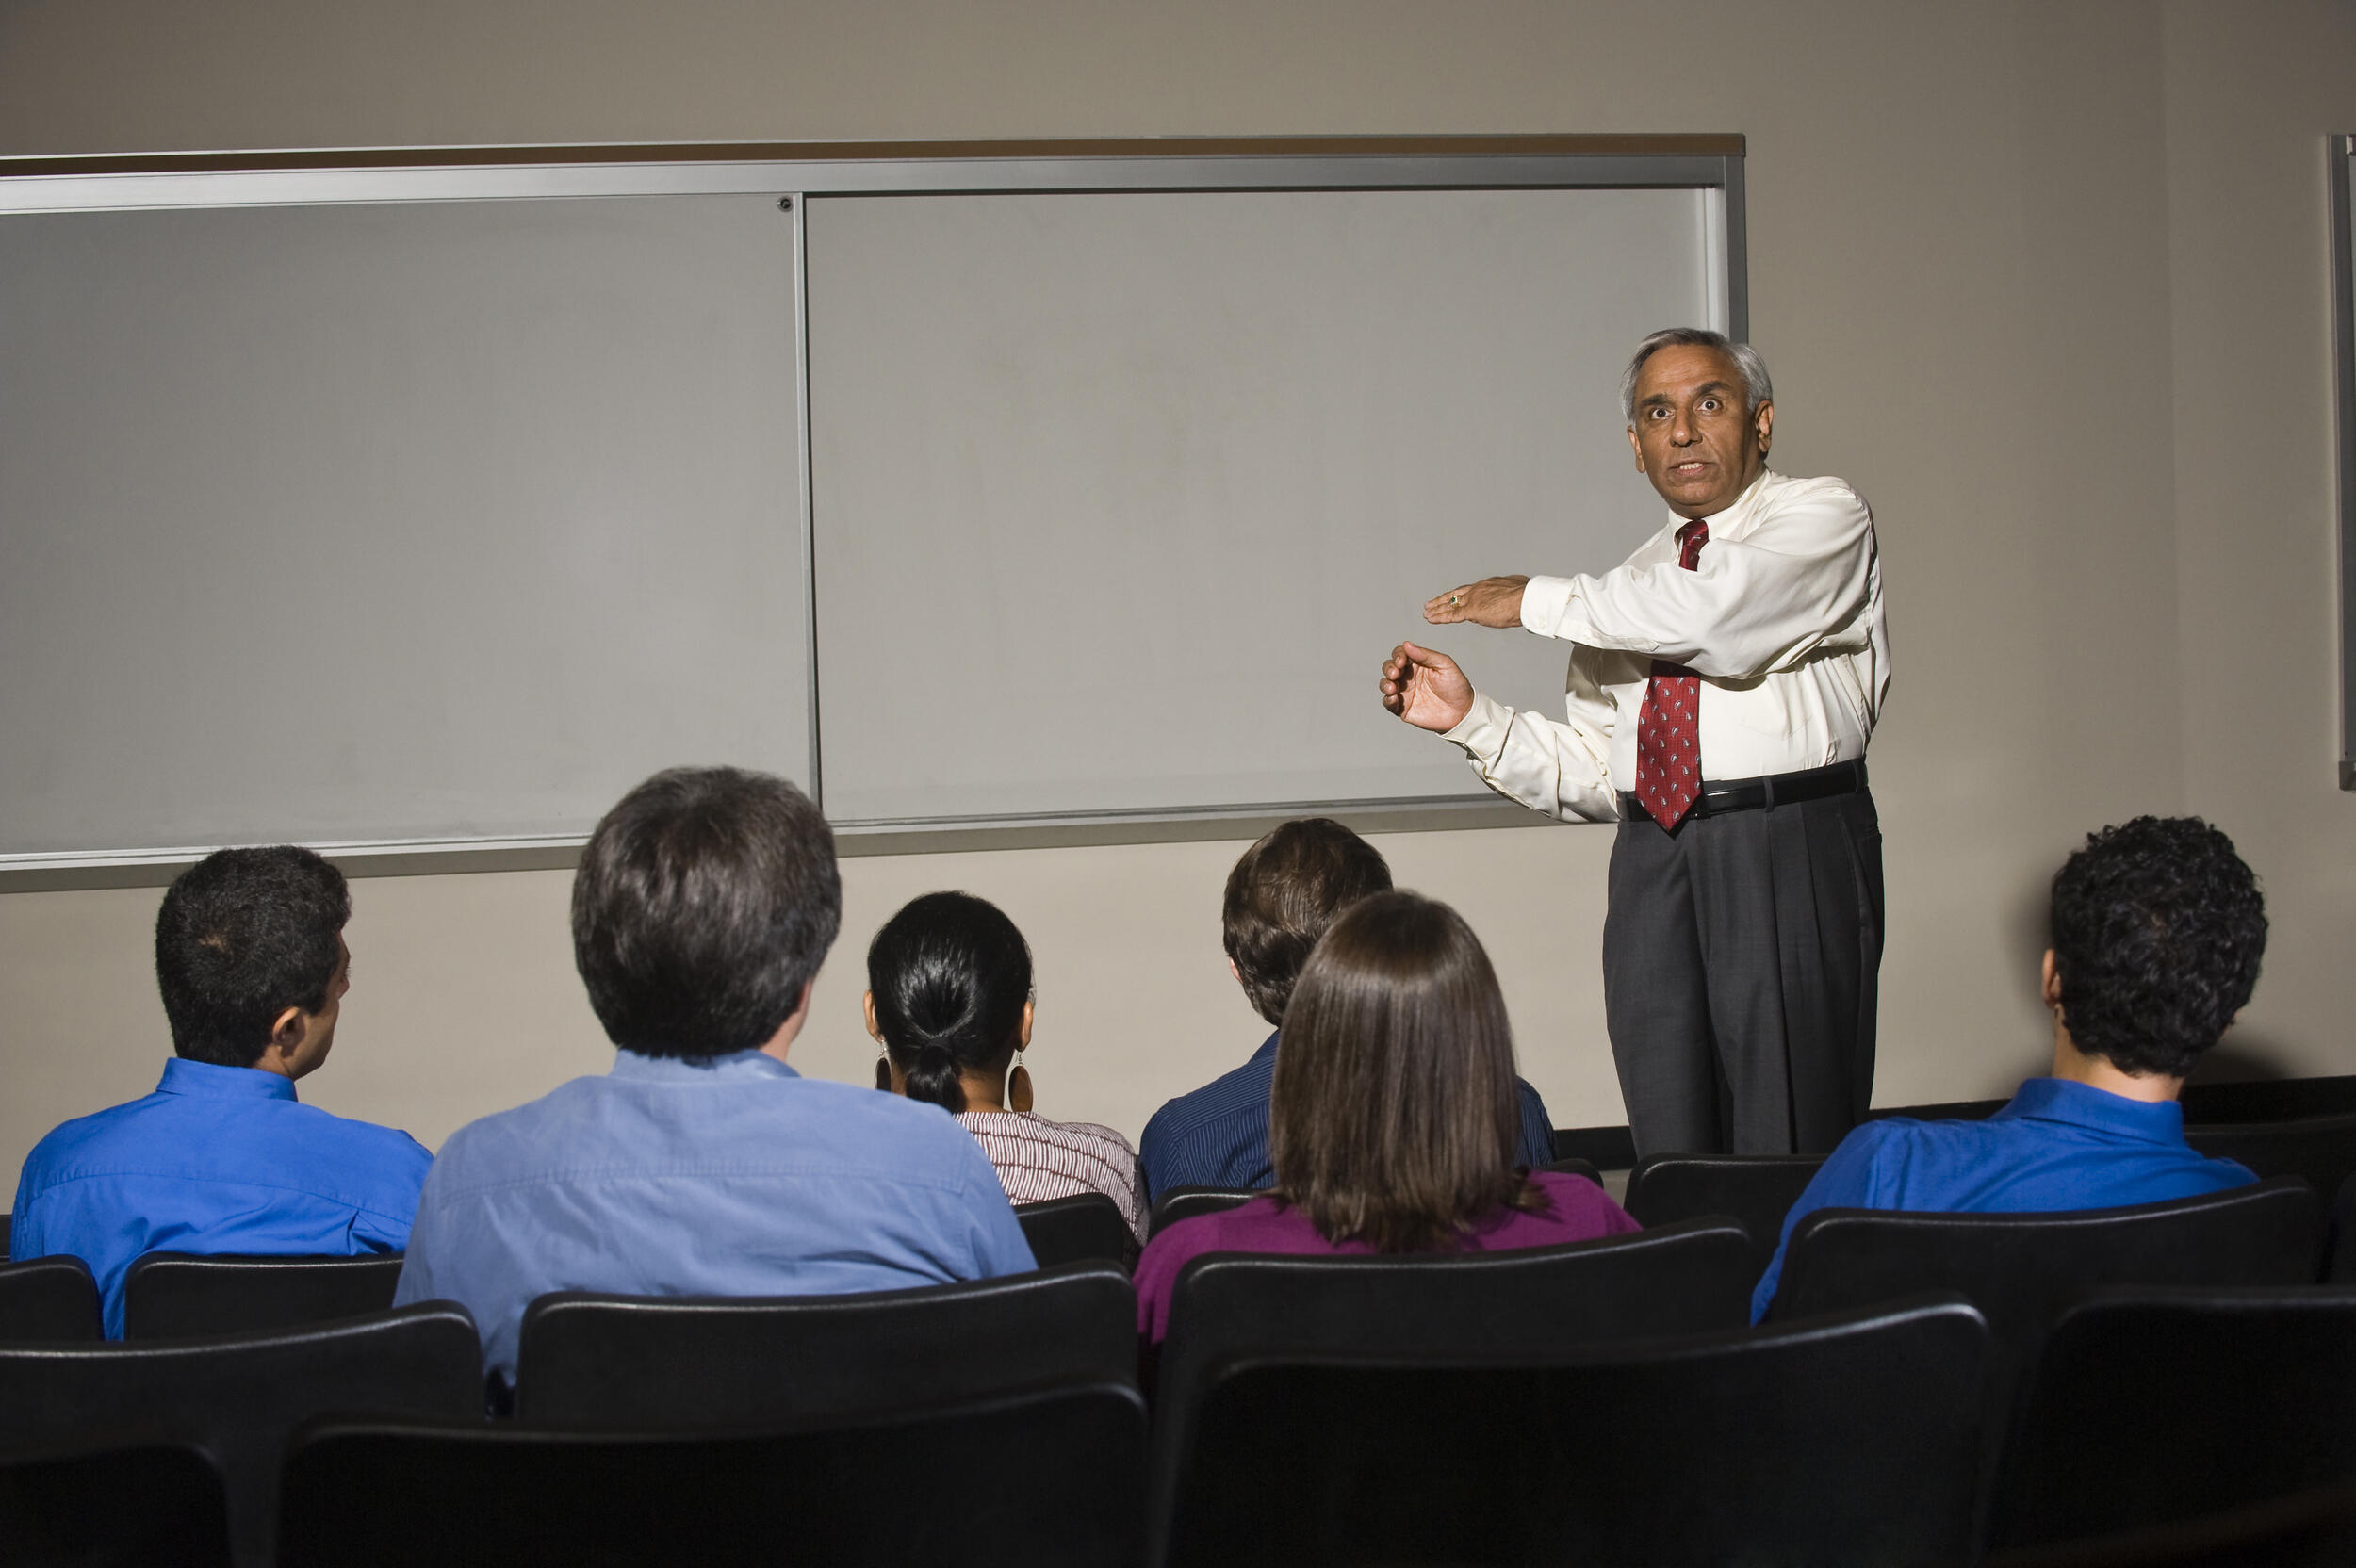 A photo of a man standing at the front of a classroom and motioning towards a white board while talking to students. 